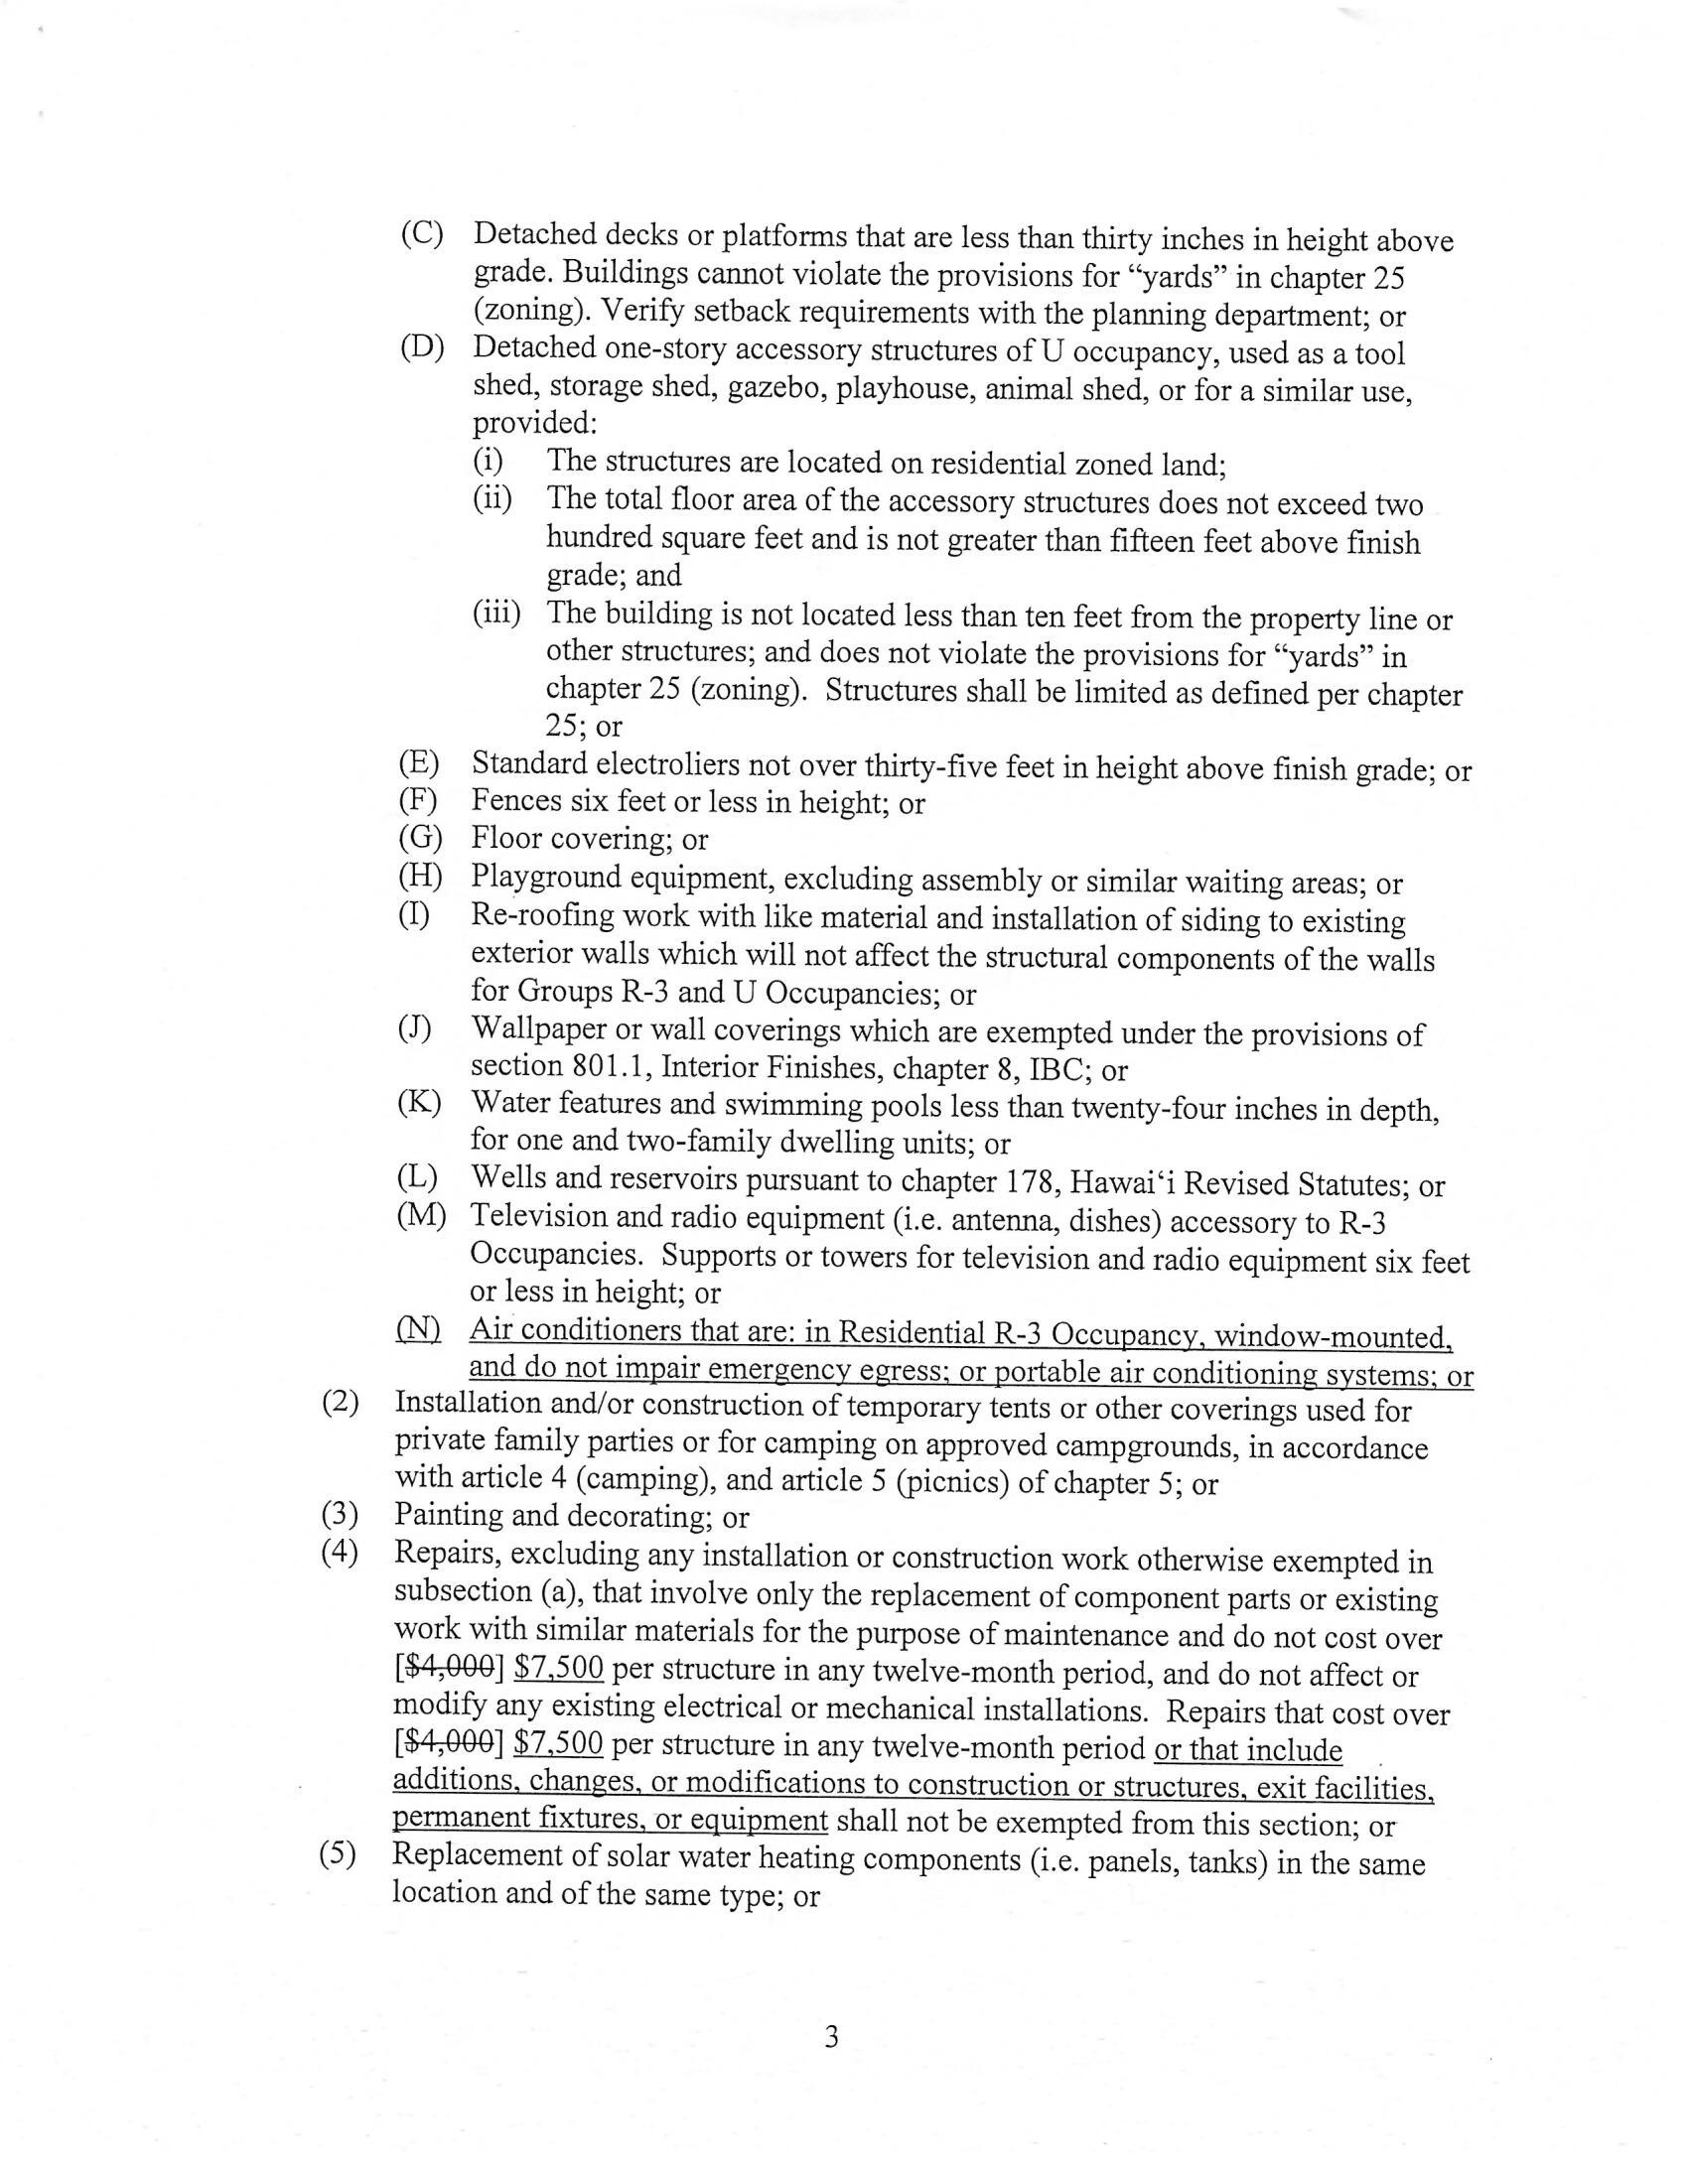 Proposed amendments to Bill 179 page 3